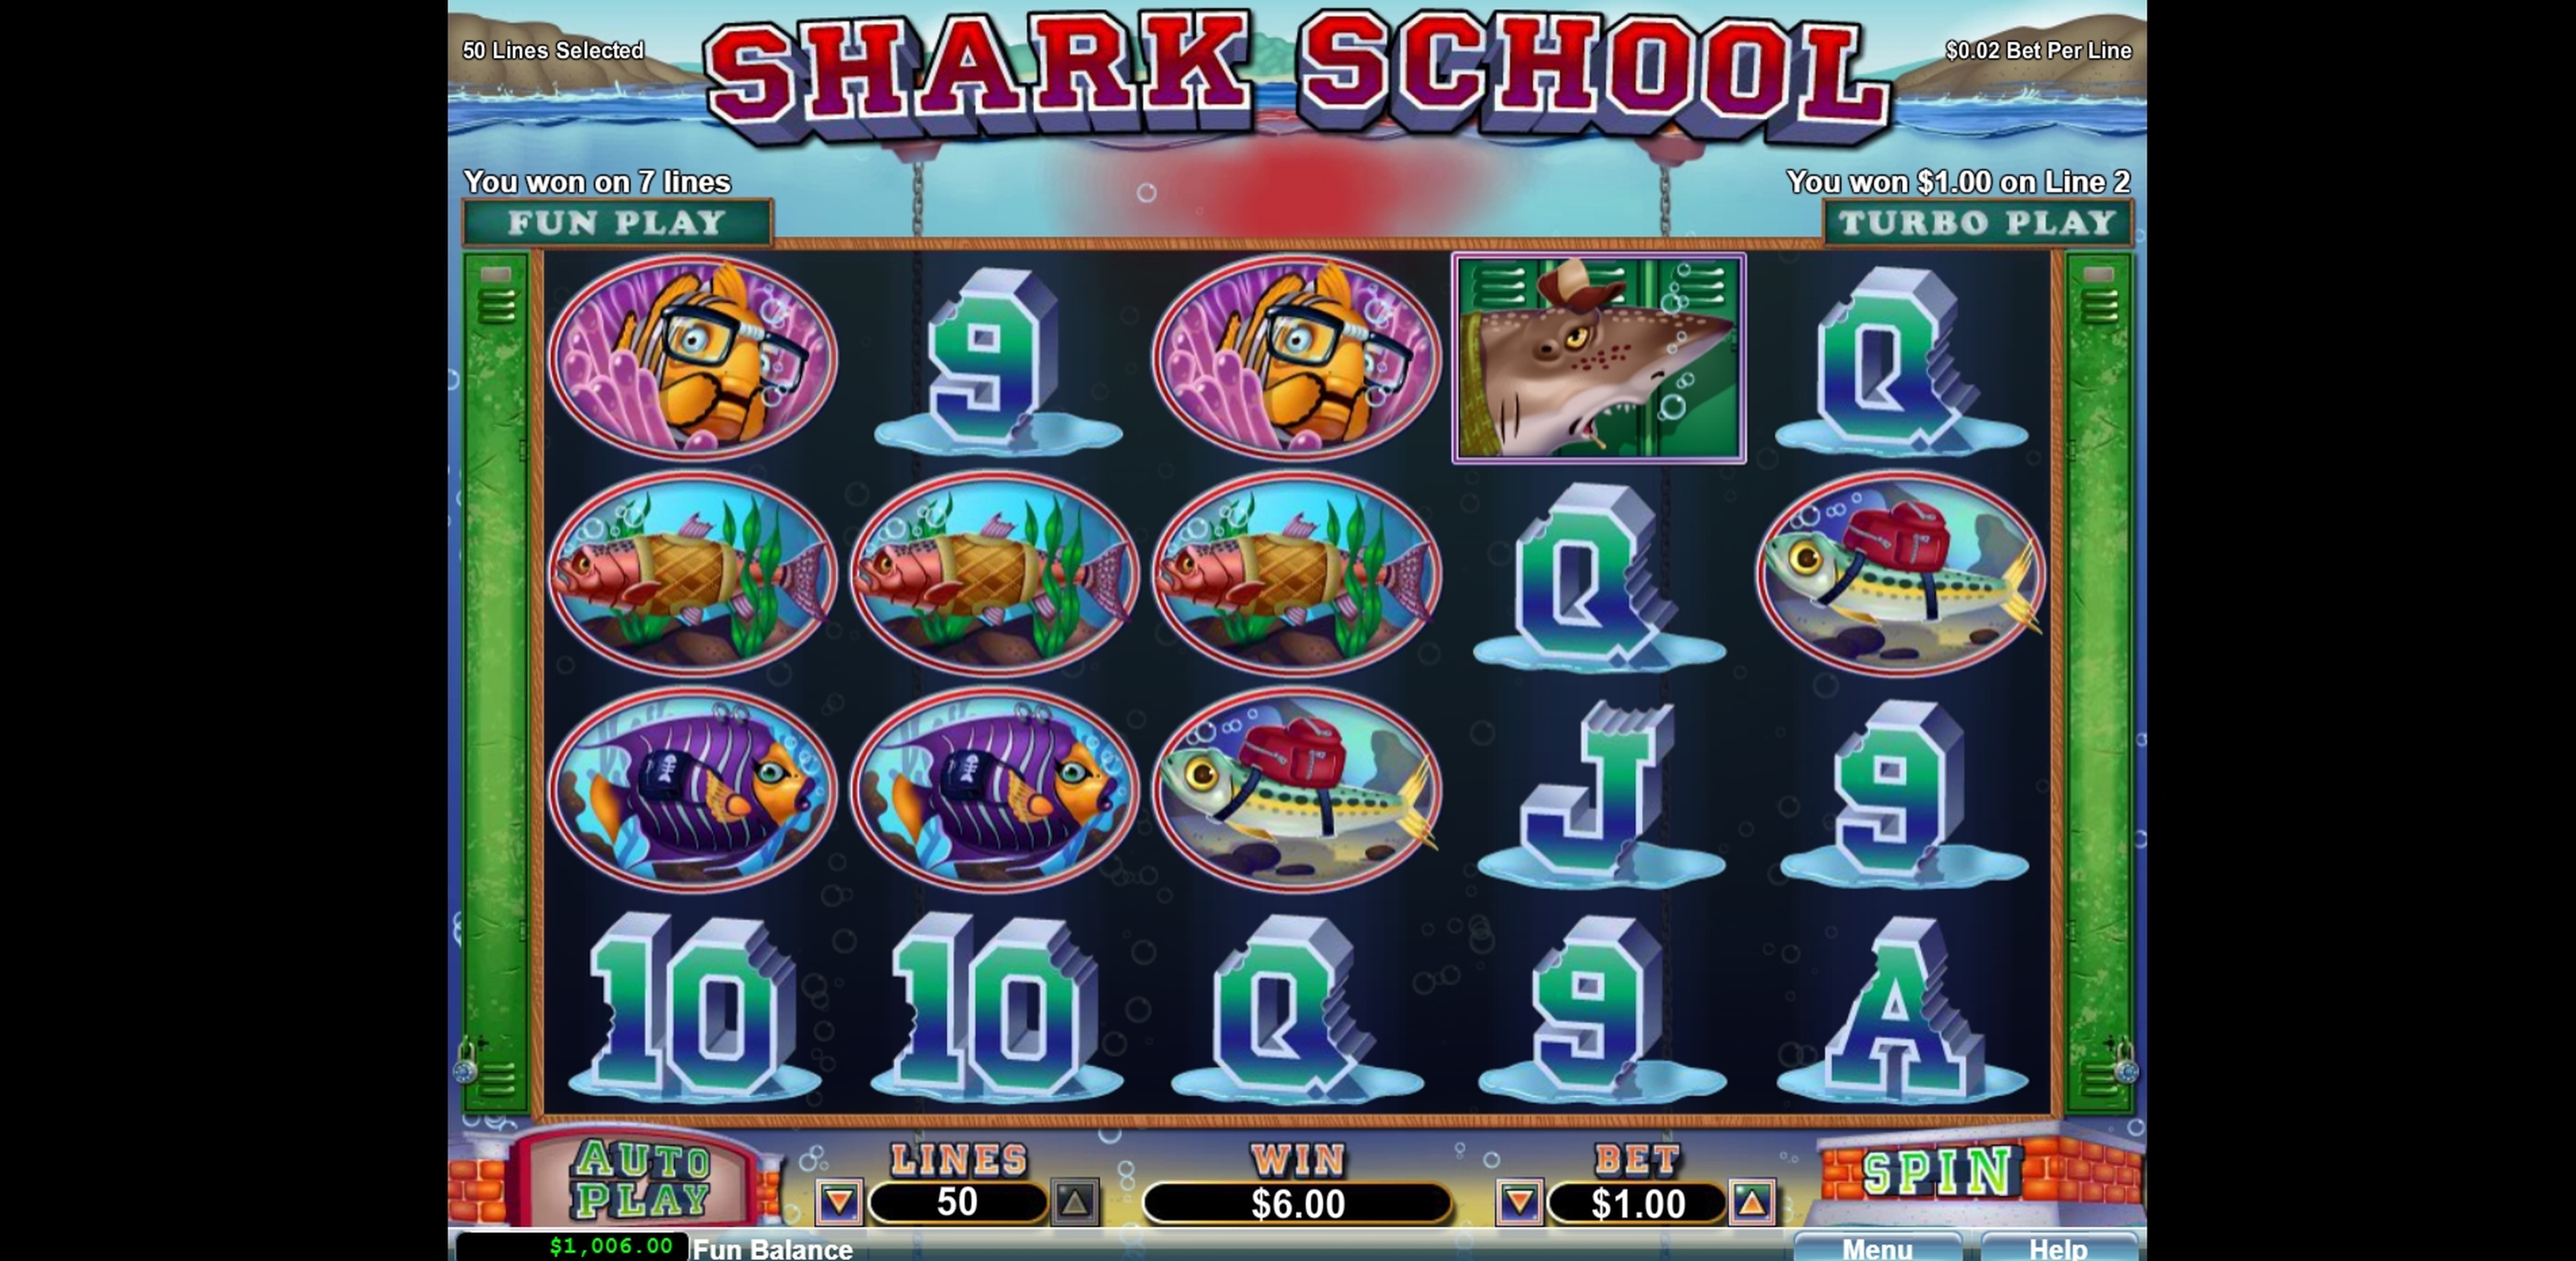 Win Money in Shark School Free Slot Game by Real Time Gaming